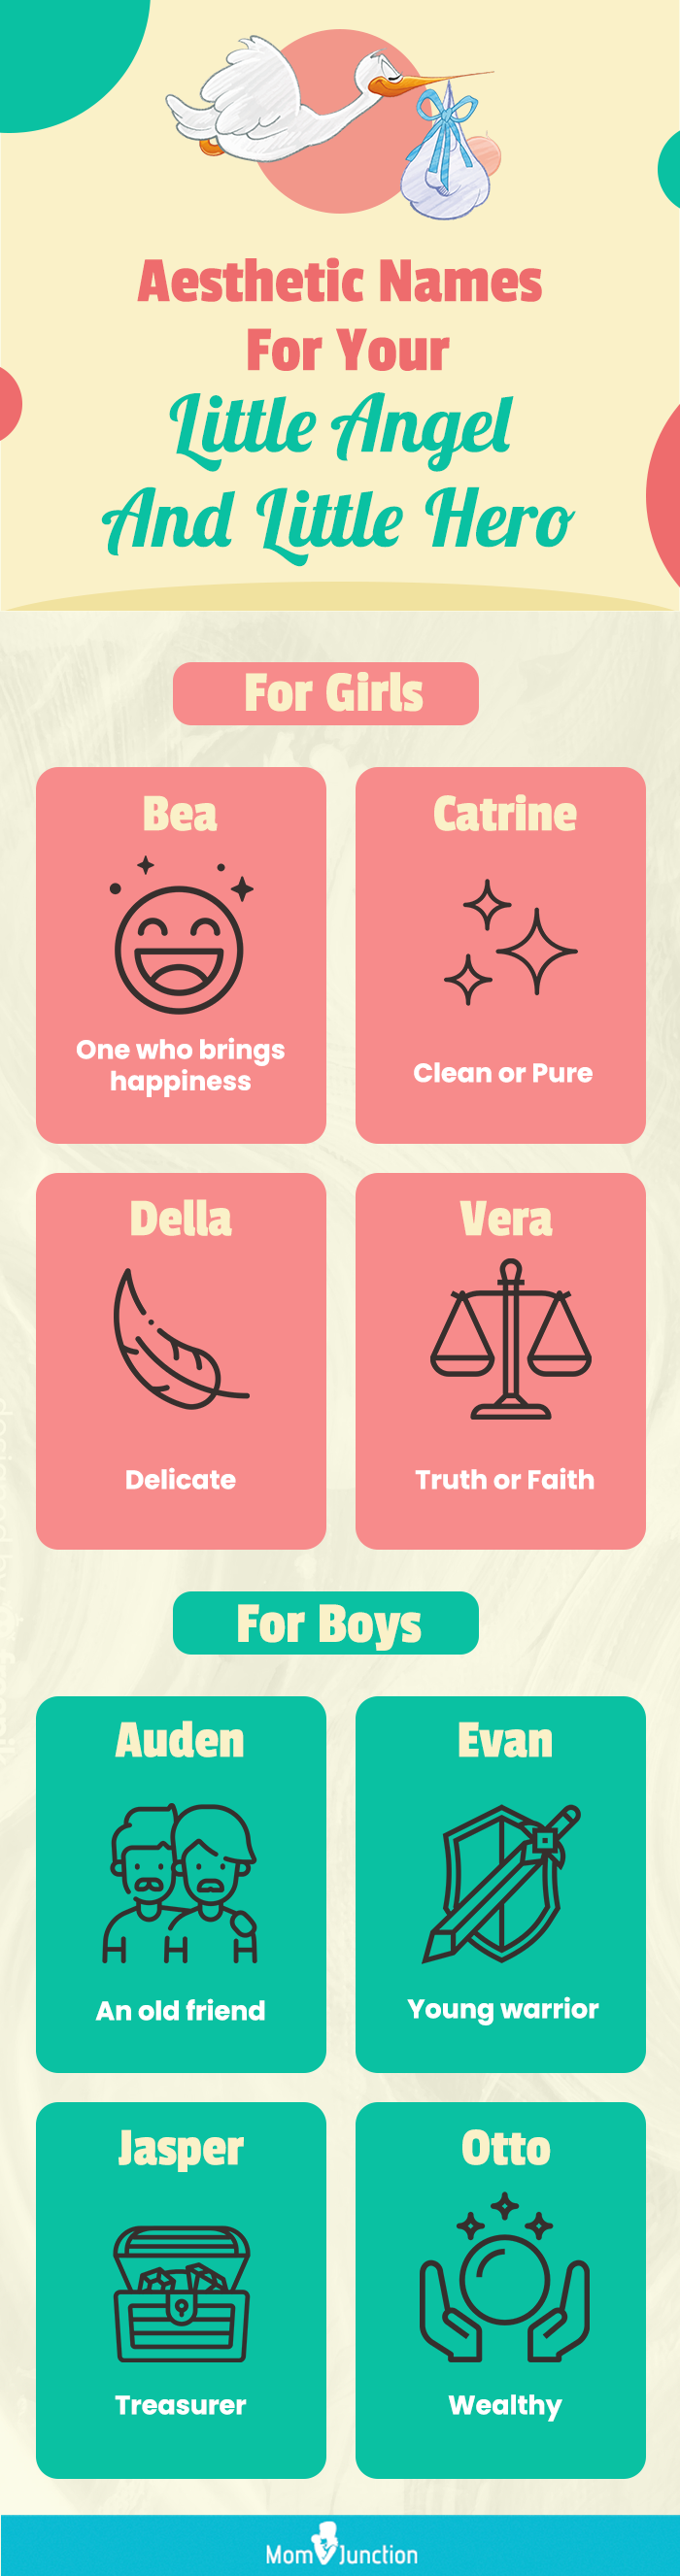 aesthetic names for your little angel (infographic)